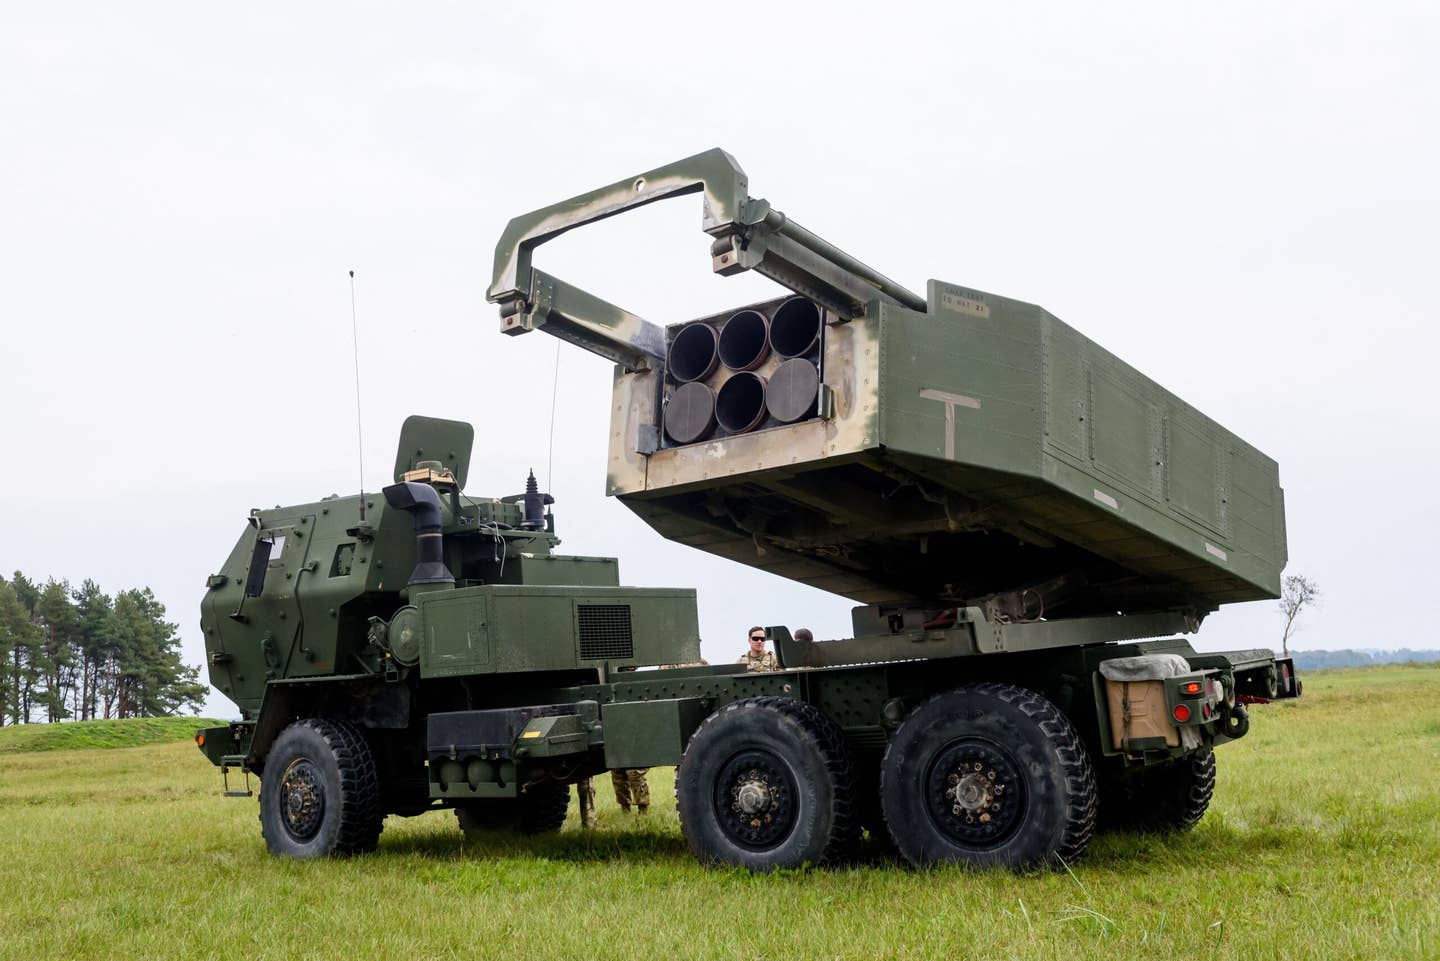 The High Mobility Artillery Rocket Systems (HIMARS) is pictured during the military exercise Namejs 2022 on September 26, 2022 in Skede, Latvia. <em>Credit: Photo by GINTS IVUSKANS/AFP via Getty Images</em>